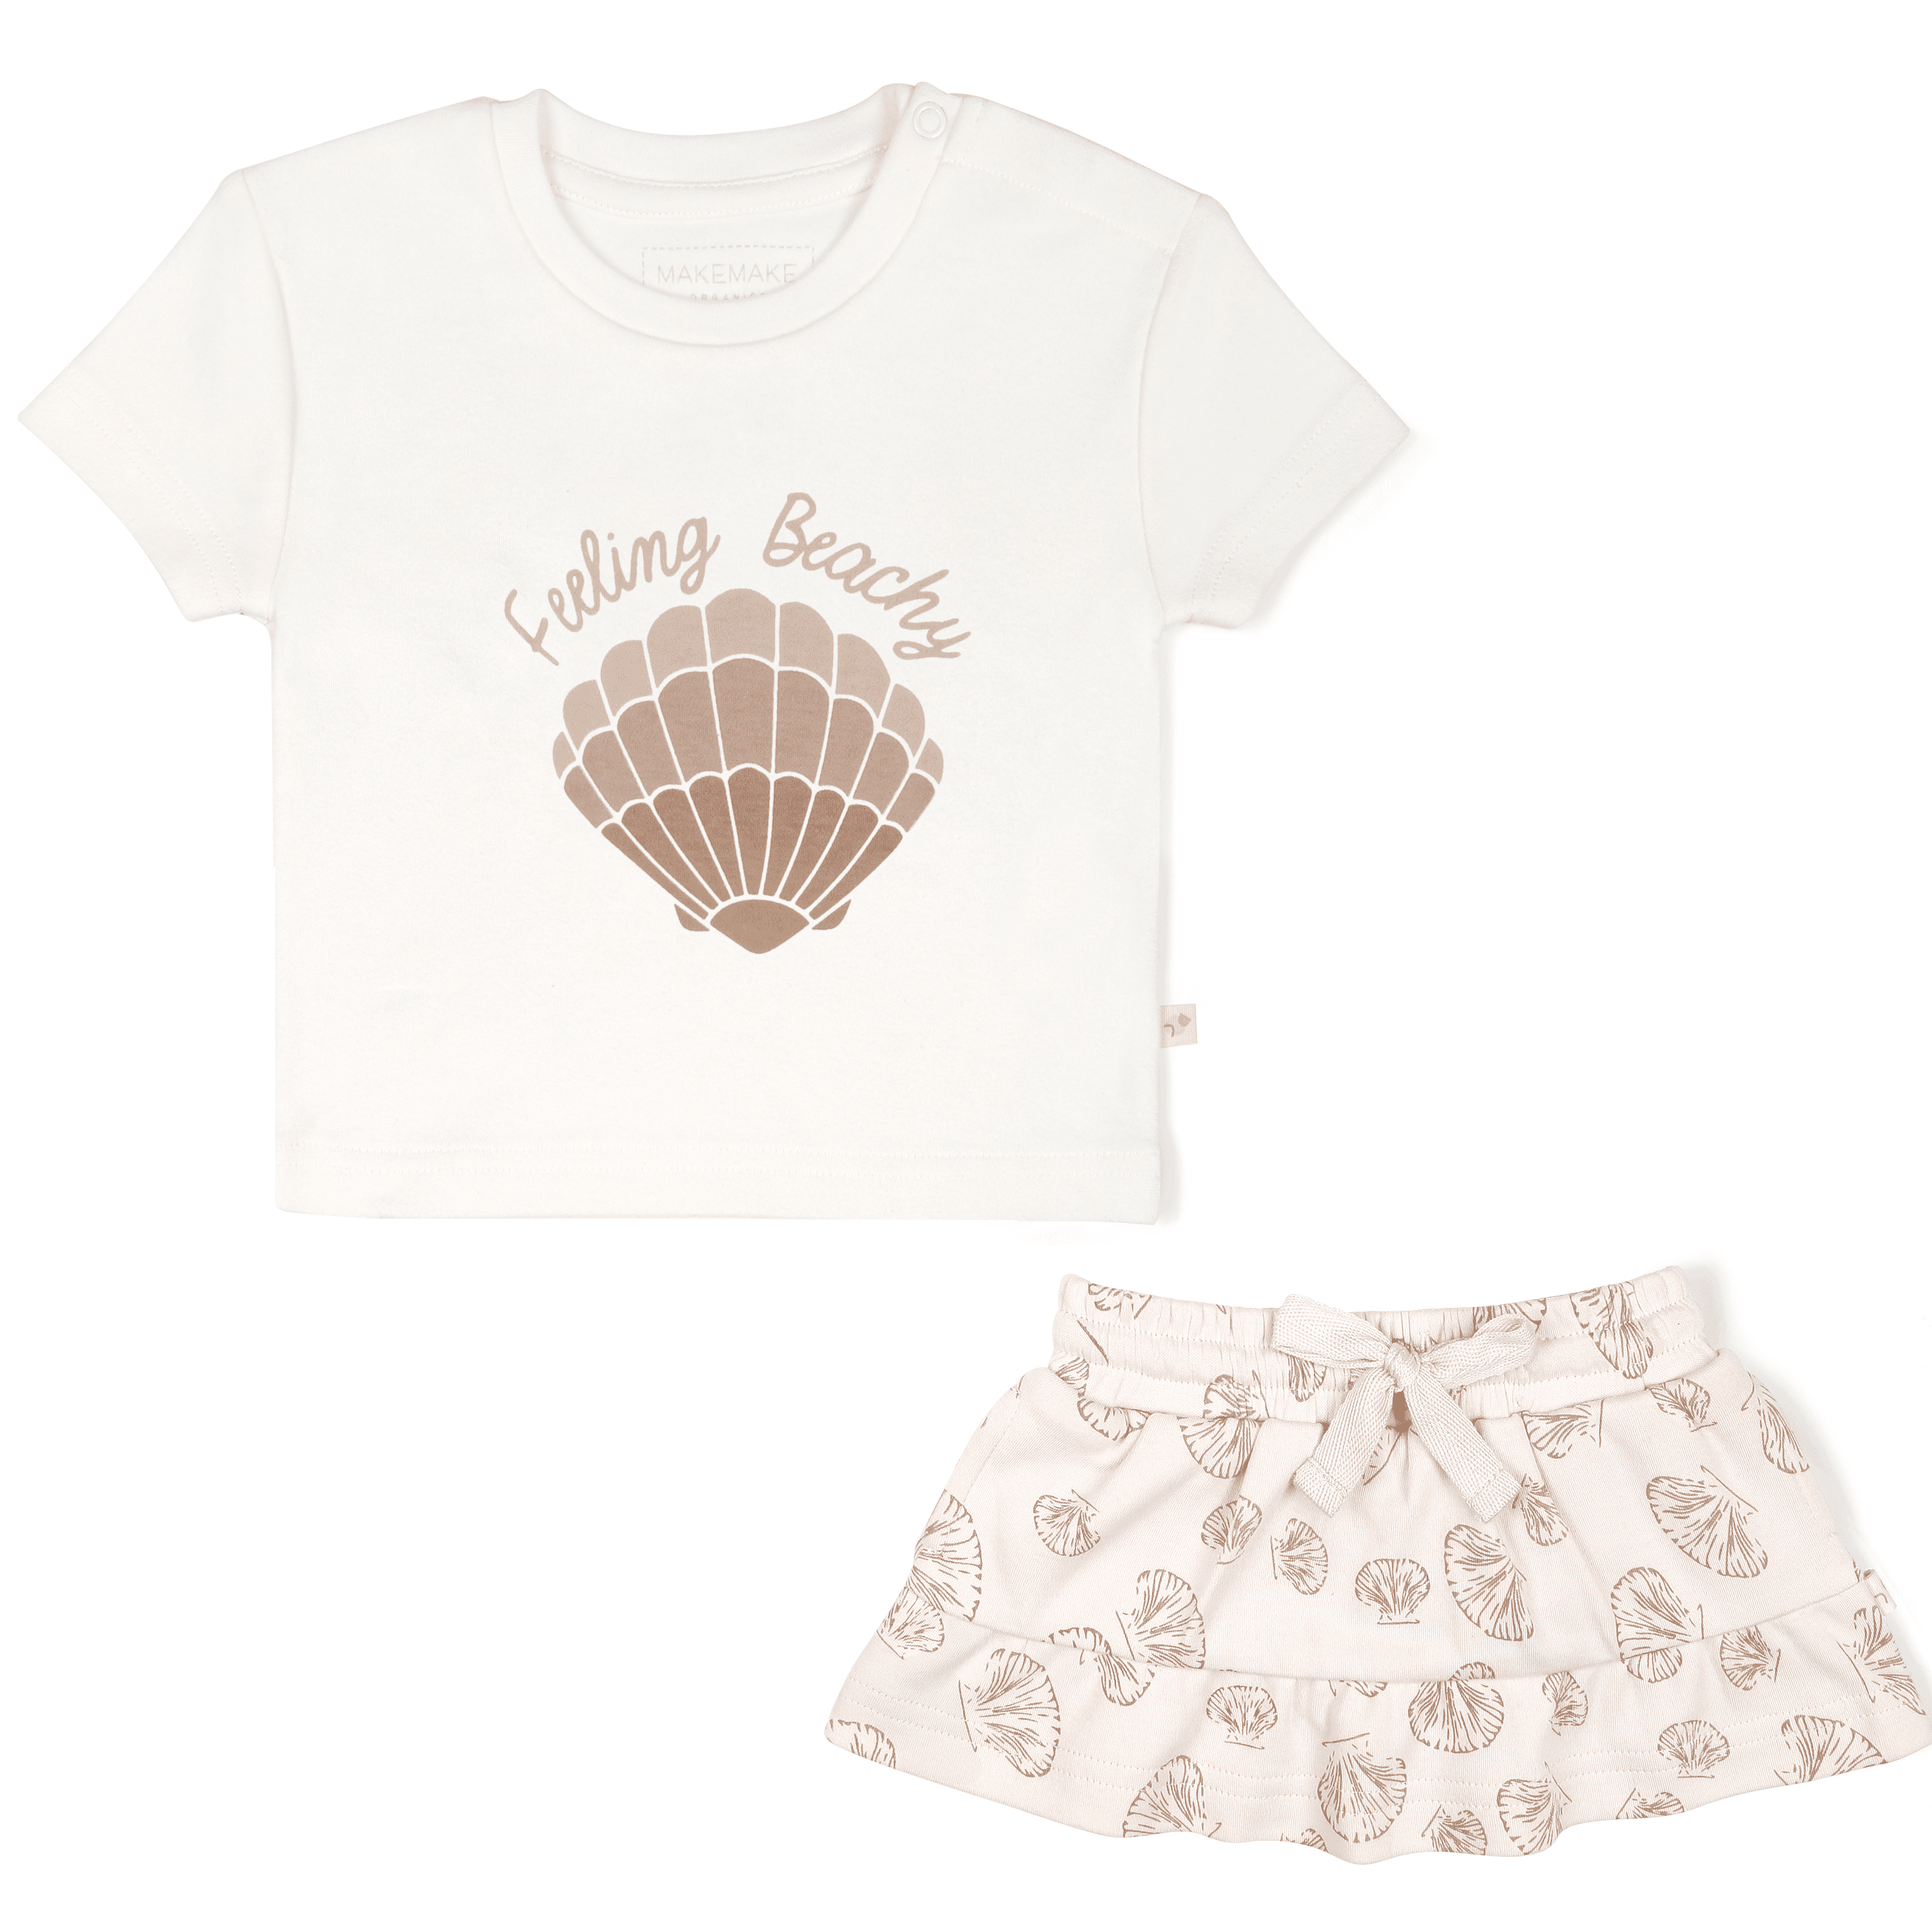 A toddler's outfit consisting of a Boxy Tee and Skort Set - Seashells from Makemake Organics, with a white t-shirt featuring the phrase "feeling beachy" and a seashell graphic paired with a pink skirt adorned with a seashell print.